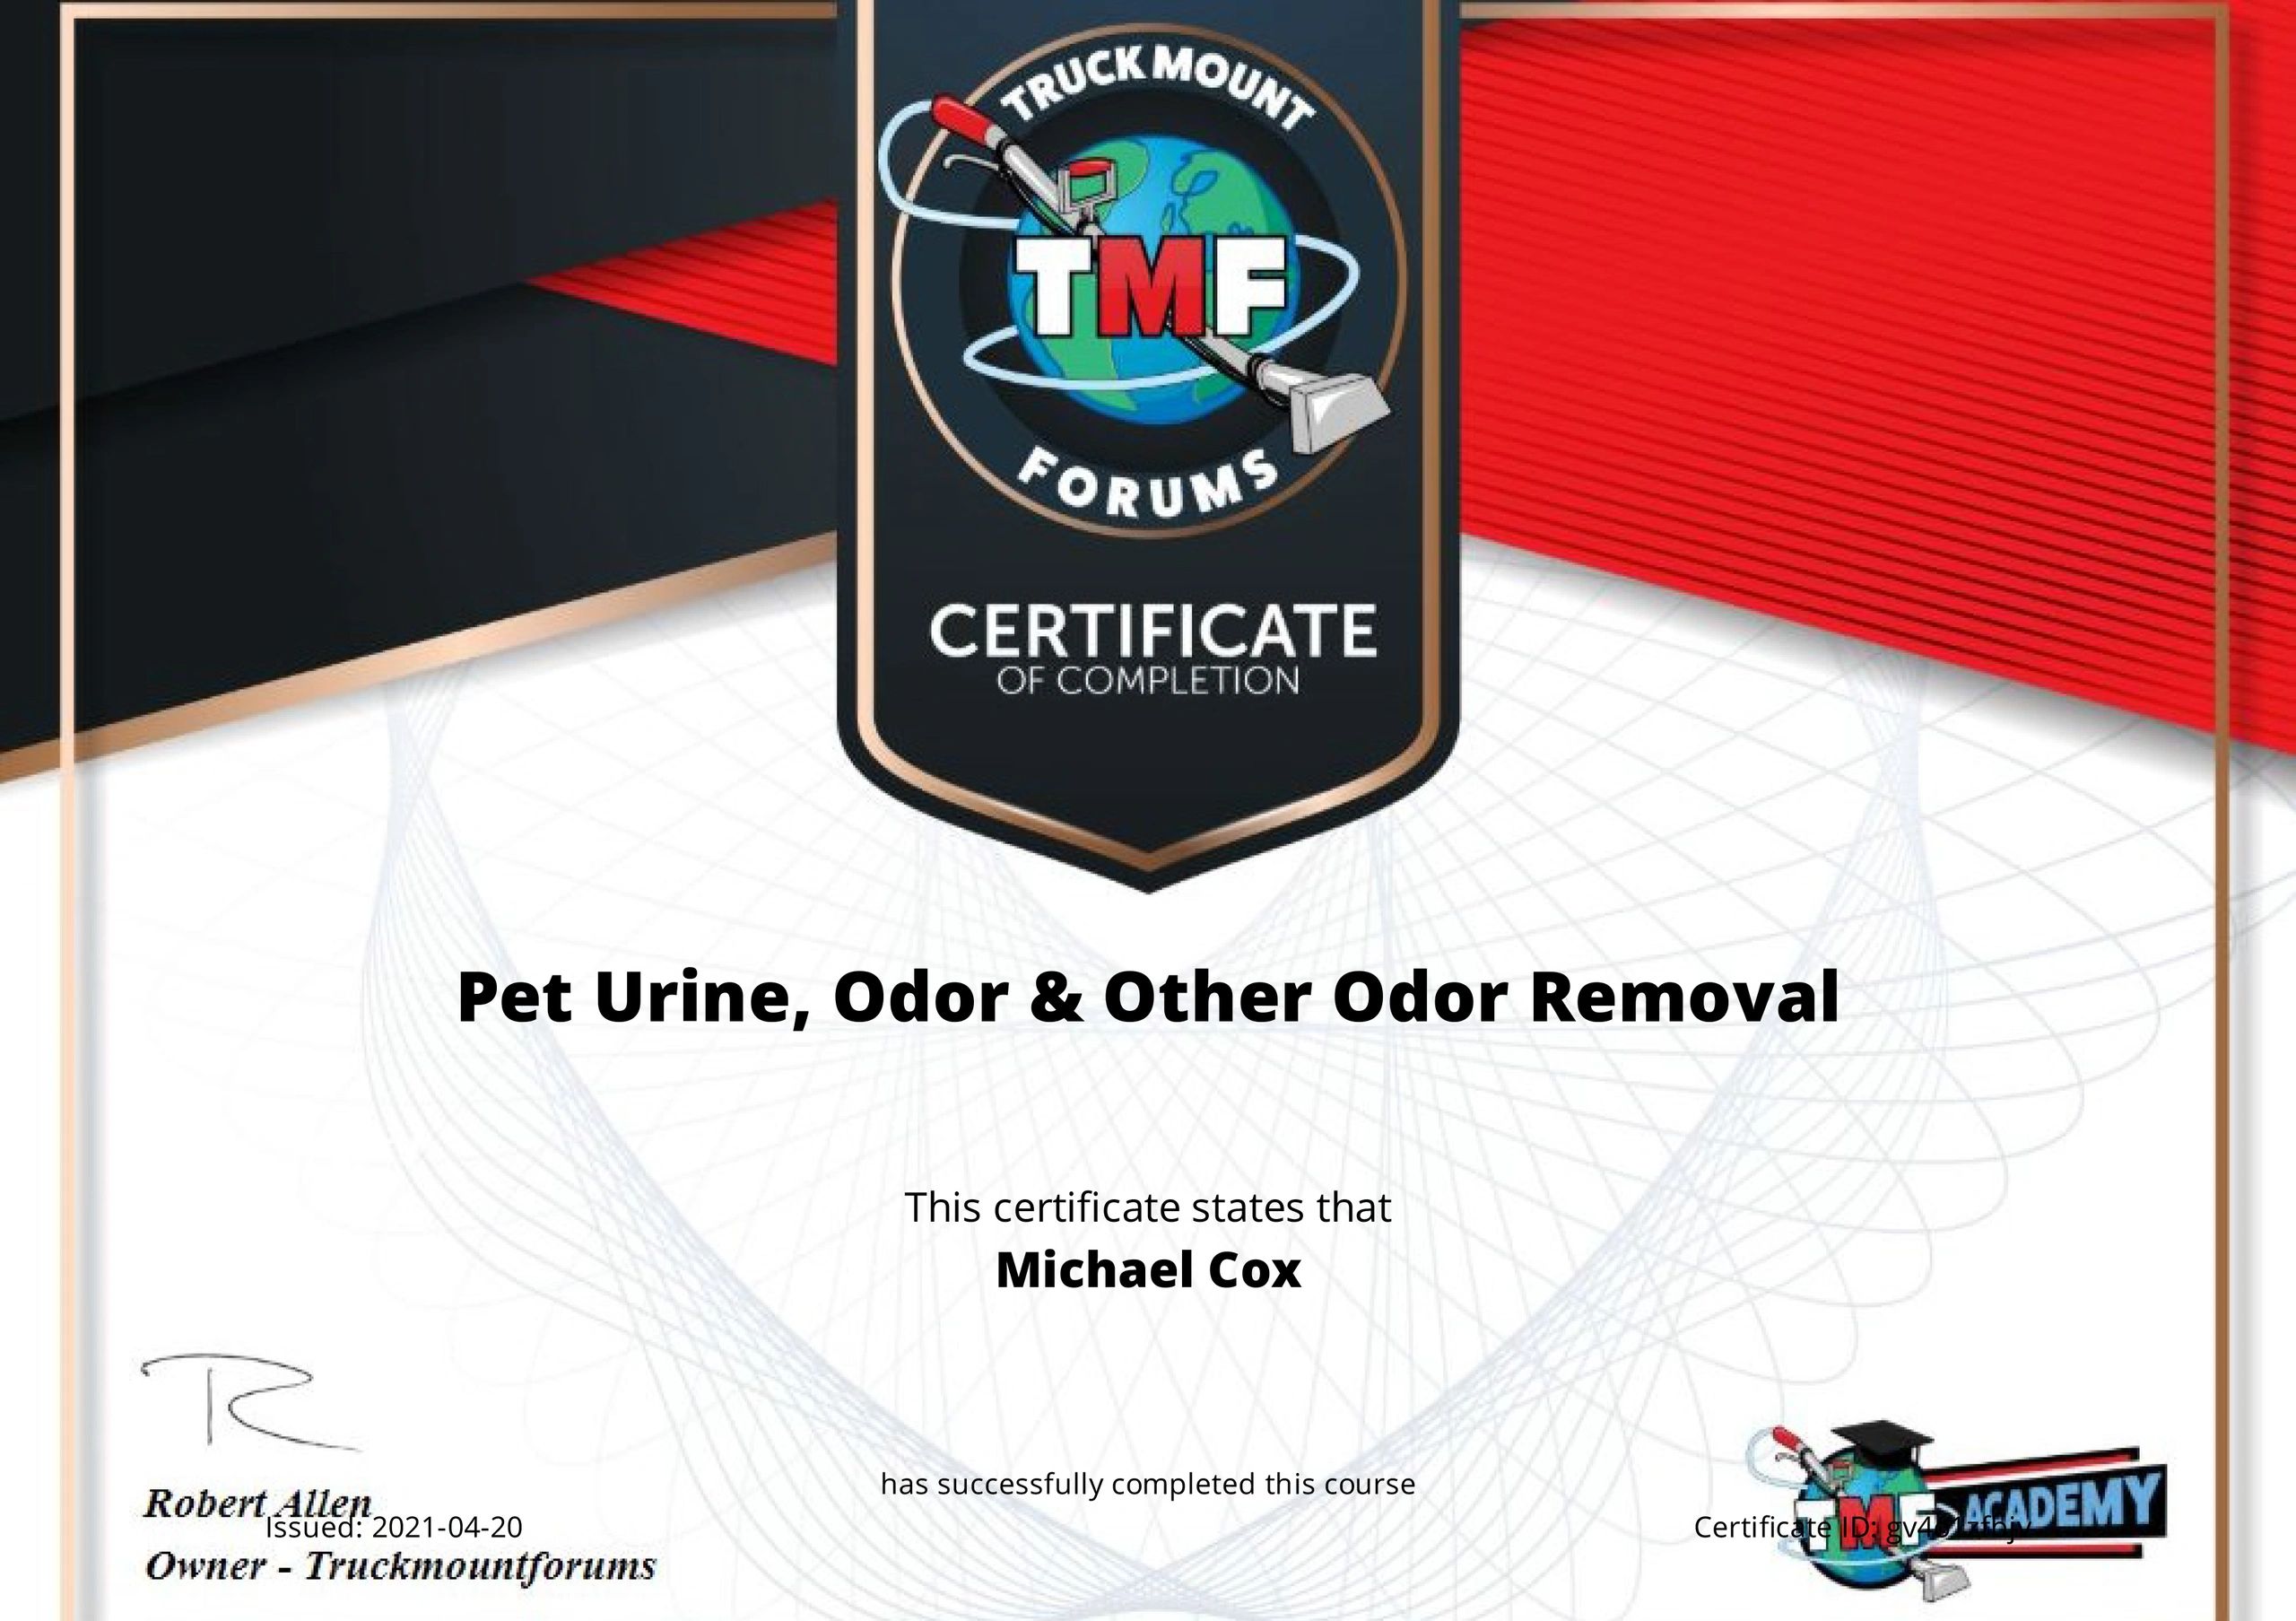 Certification in Pet Urine, Odor and Other Odor Removal